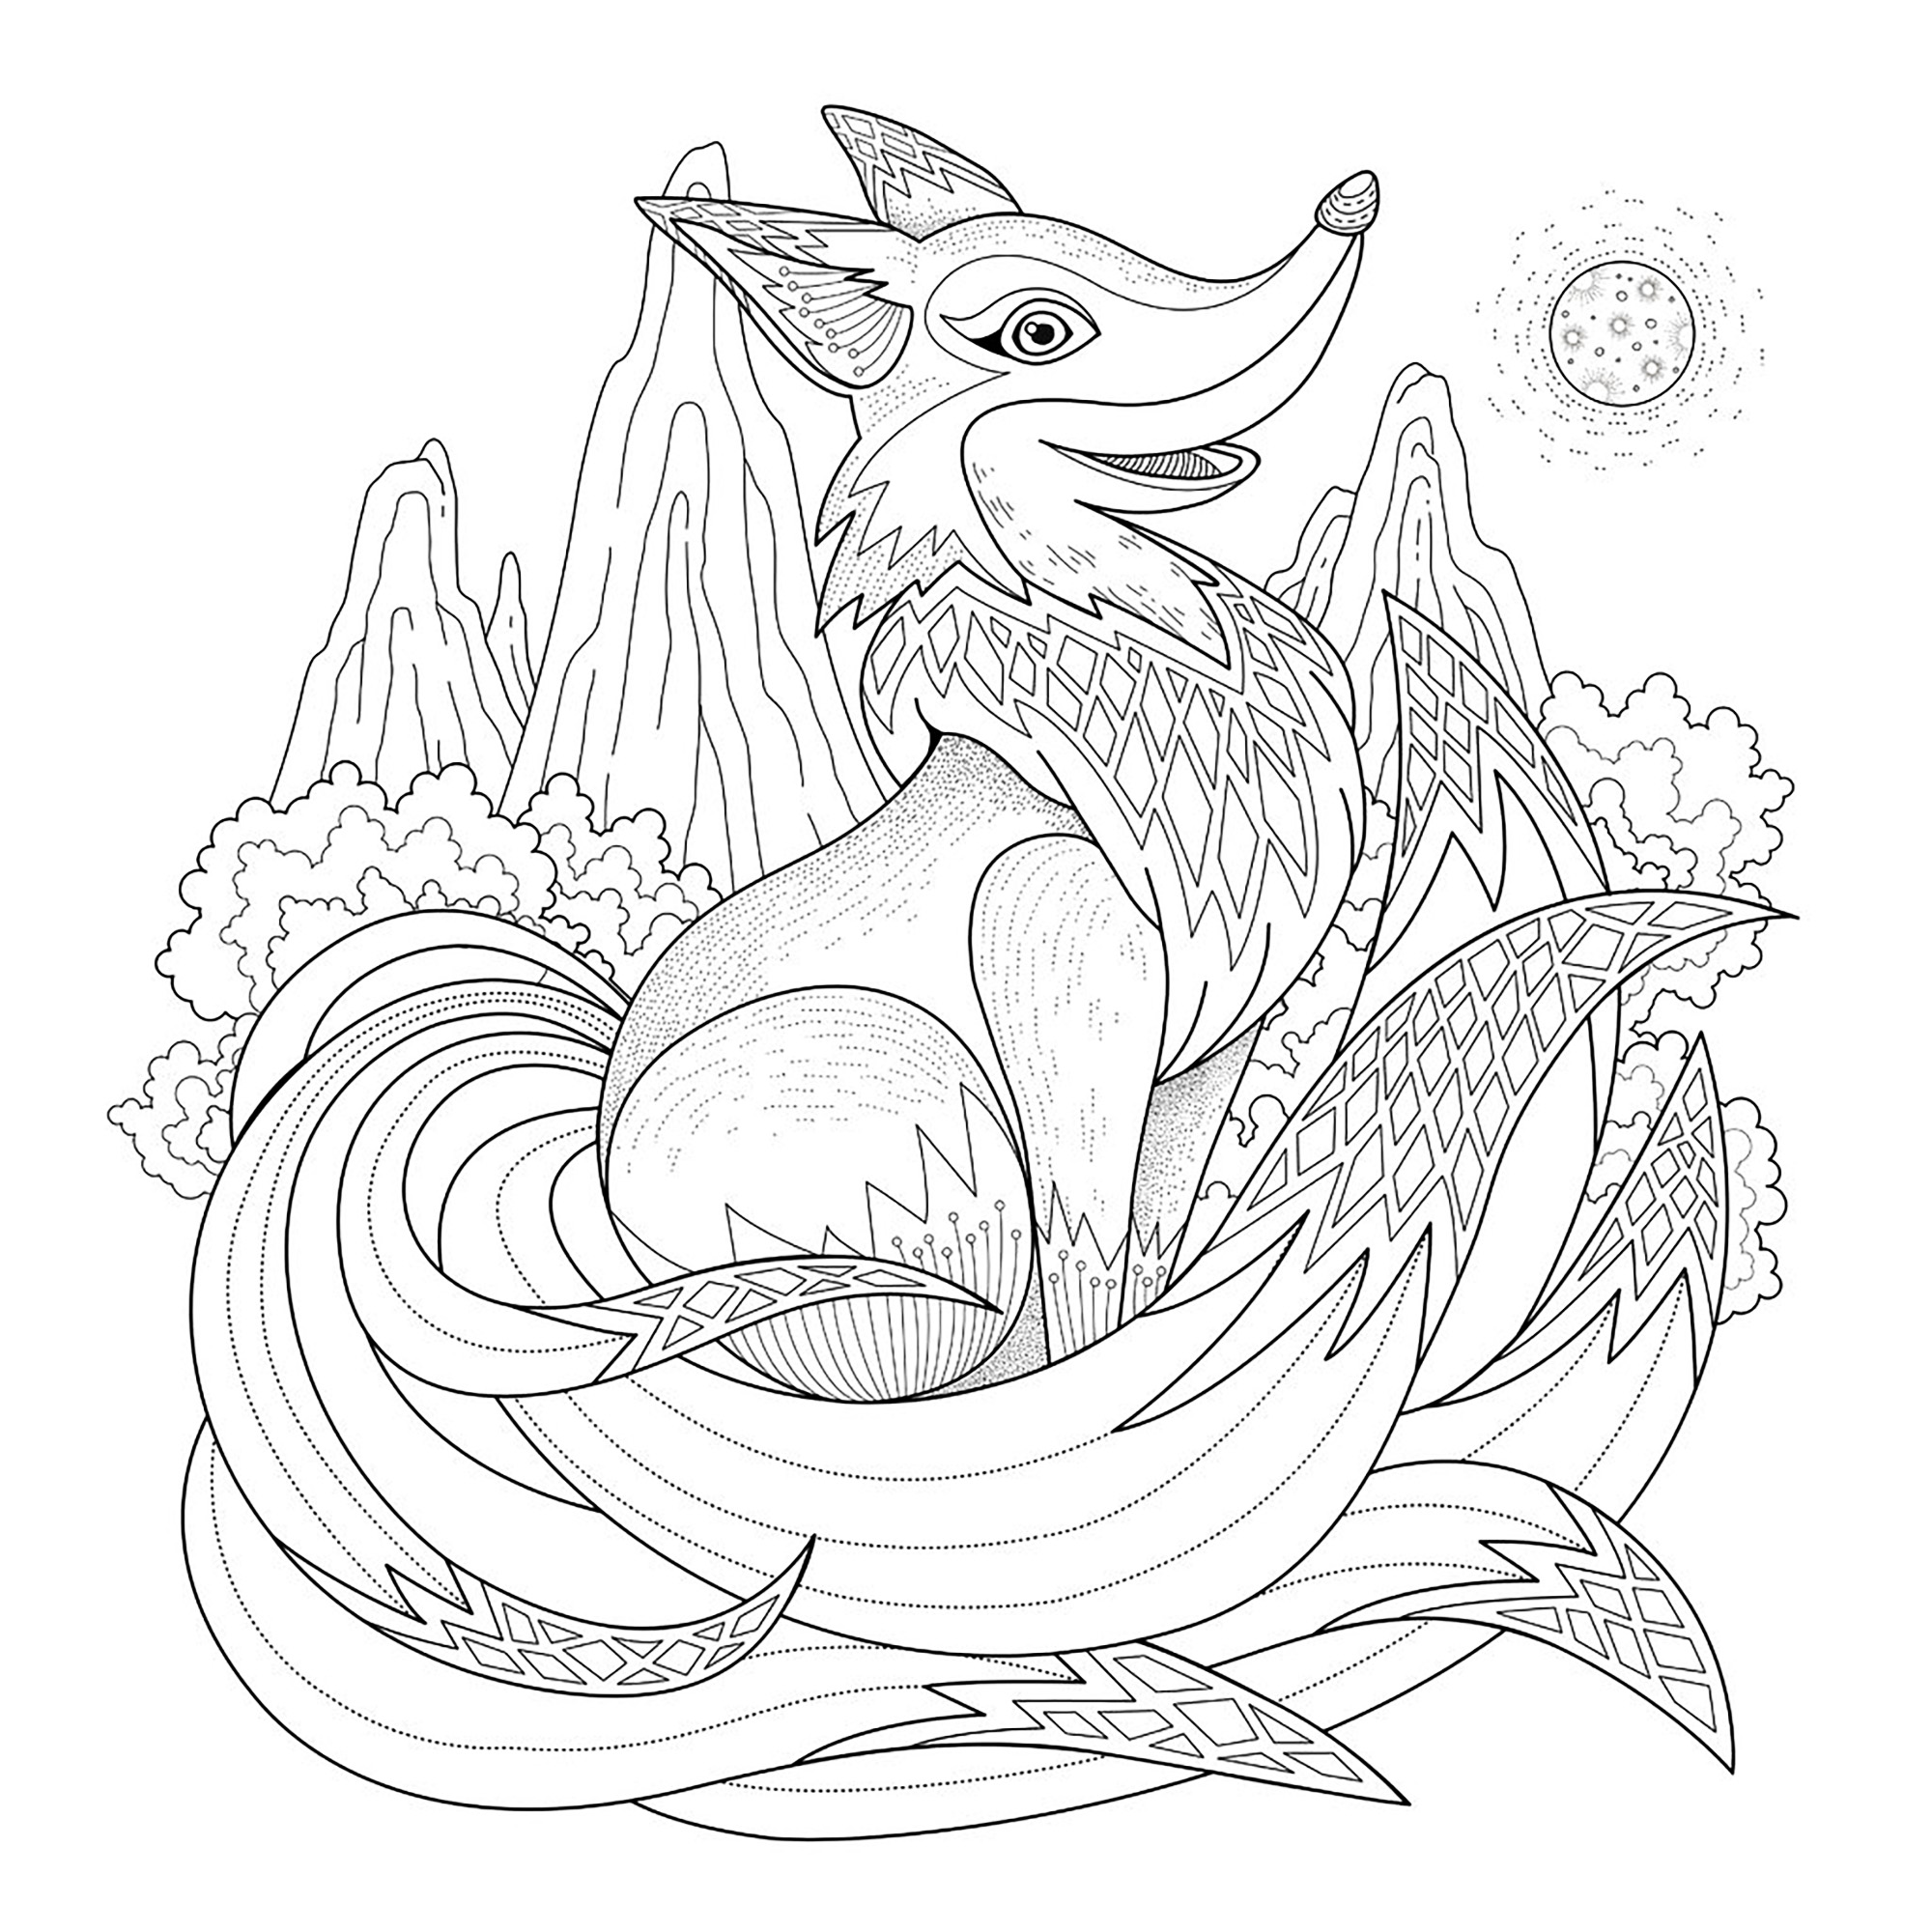 Funny and happy fox - Foxes Adult Coloring Pages